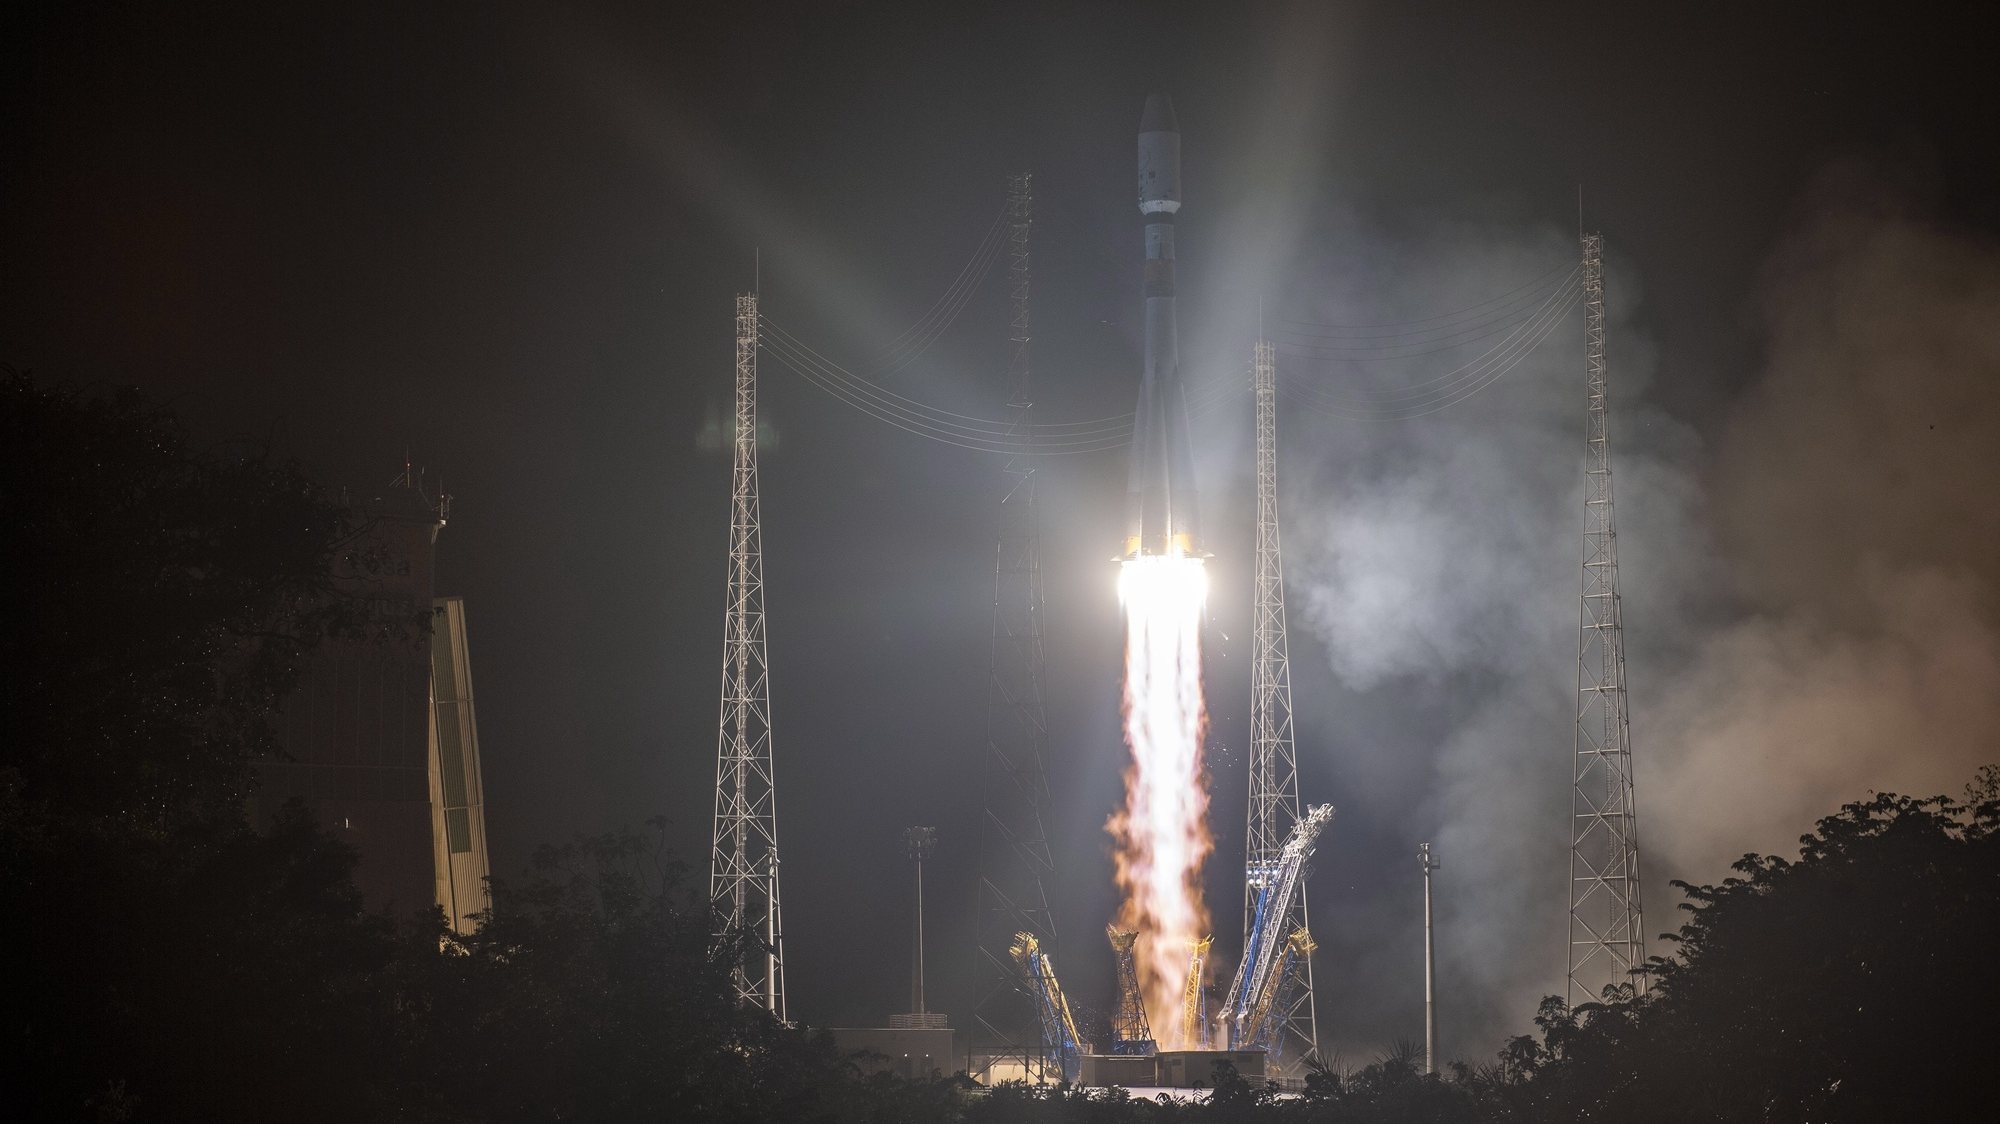 epa08078767 A handout photo made available by ESA-CNES-ARIANESPACE shows the Soyuz VS23 rocket transprting ESA&#039;s Cheops satellite and other satellites into space during launch at Europe&#039;s Spaceport in Kourou, French Guiana, 18 December 2019. ESA successfully launched CHEOPS, its &#039;Characterising Exoplanet Satellite&#039;, which was originally planned to launch a day earlier, but had been to be postponed due to a software problem.  EPA/JM GUILLON / ESA-CNES-ARIANESPAC MANDATORY CREDIT HANDOUT EDITORIAL USE ONLY/NO SALES